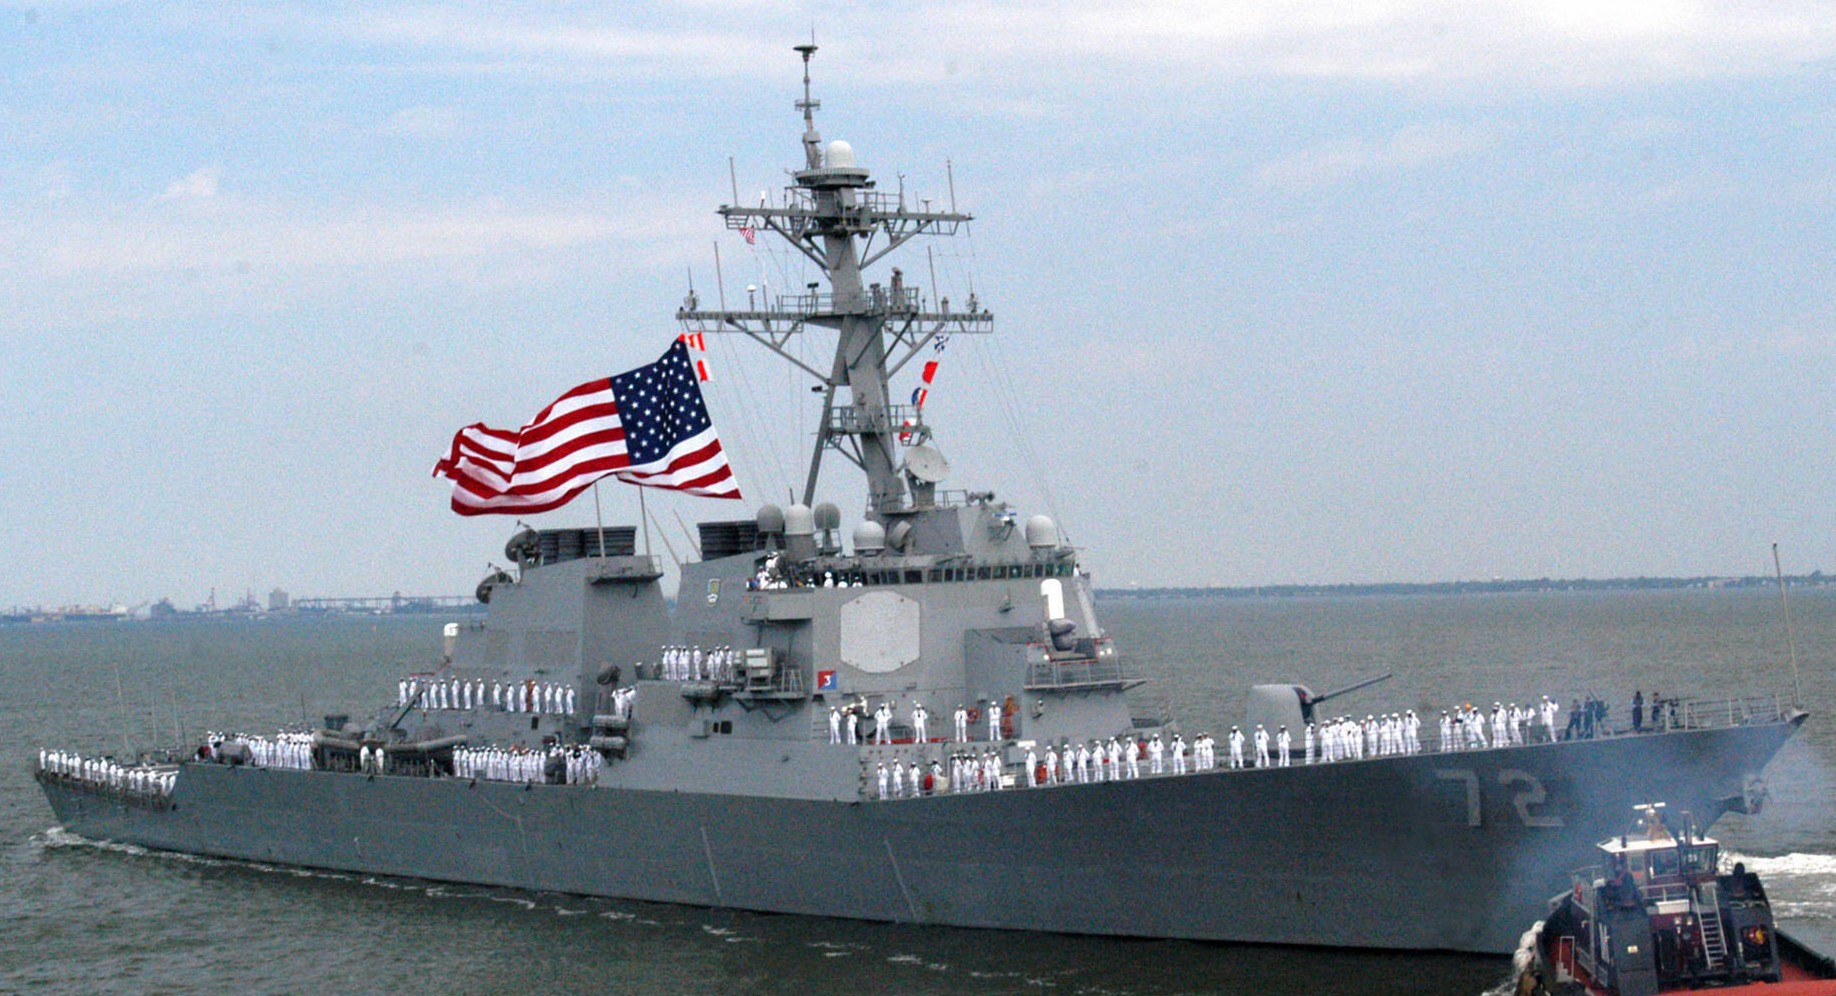 ddg-72 uss mahan guided missile destroyer arleigh burke class aegis bmd 41